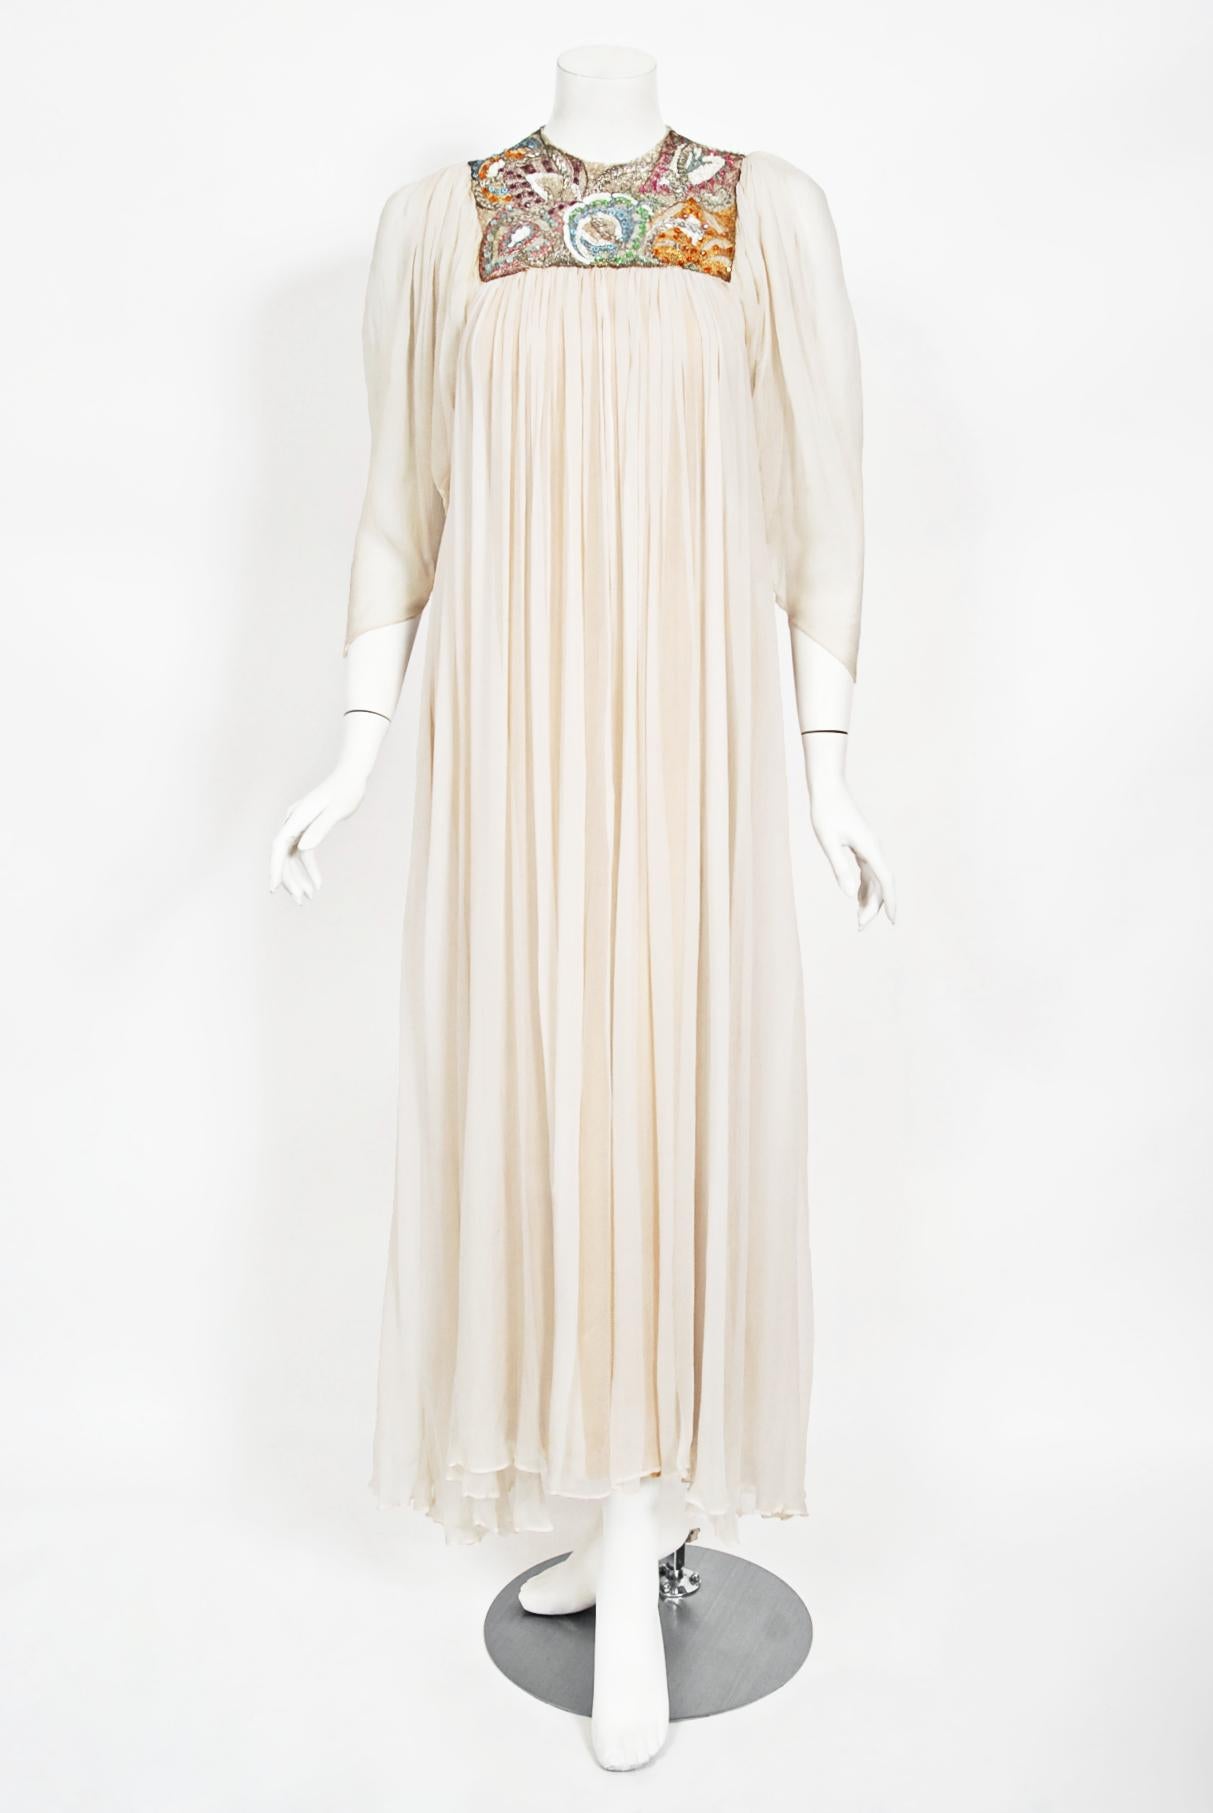 1970's Madame Grès Haute Couture Beaded Embroidered Ivory Sheer Silk Bridal Gown For Sale 3